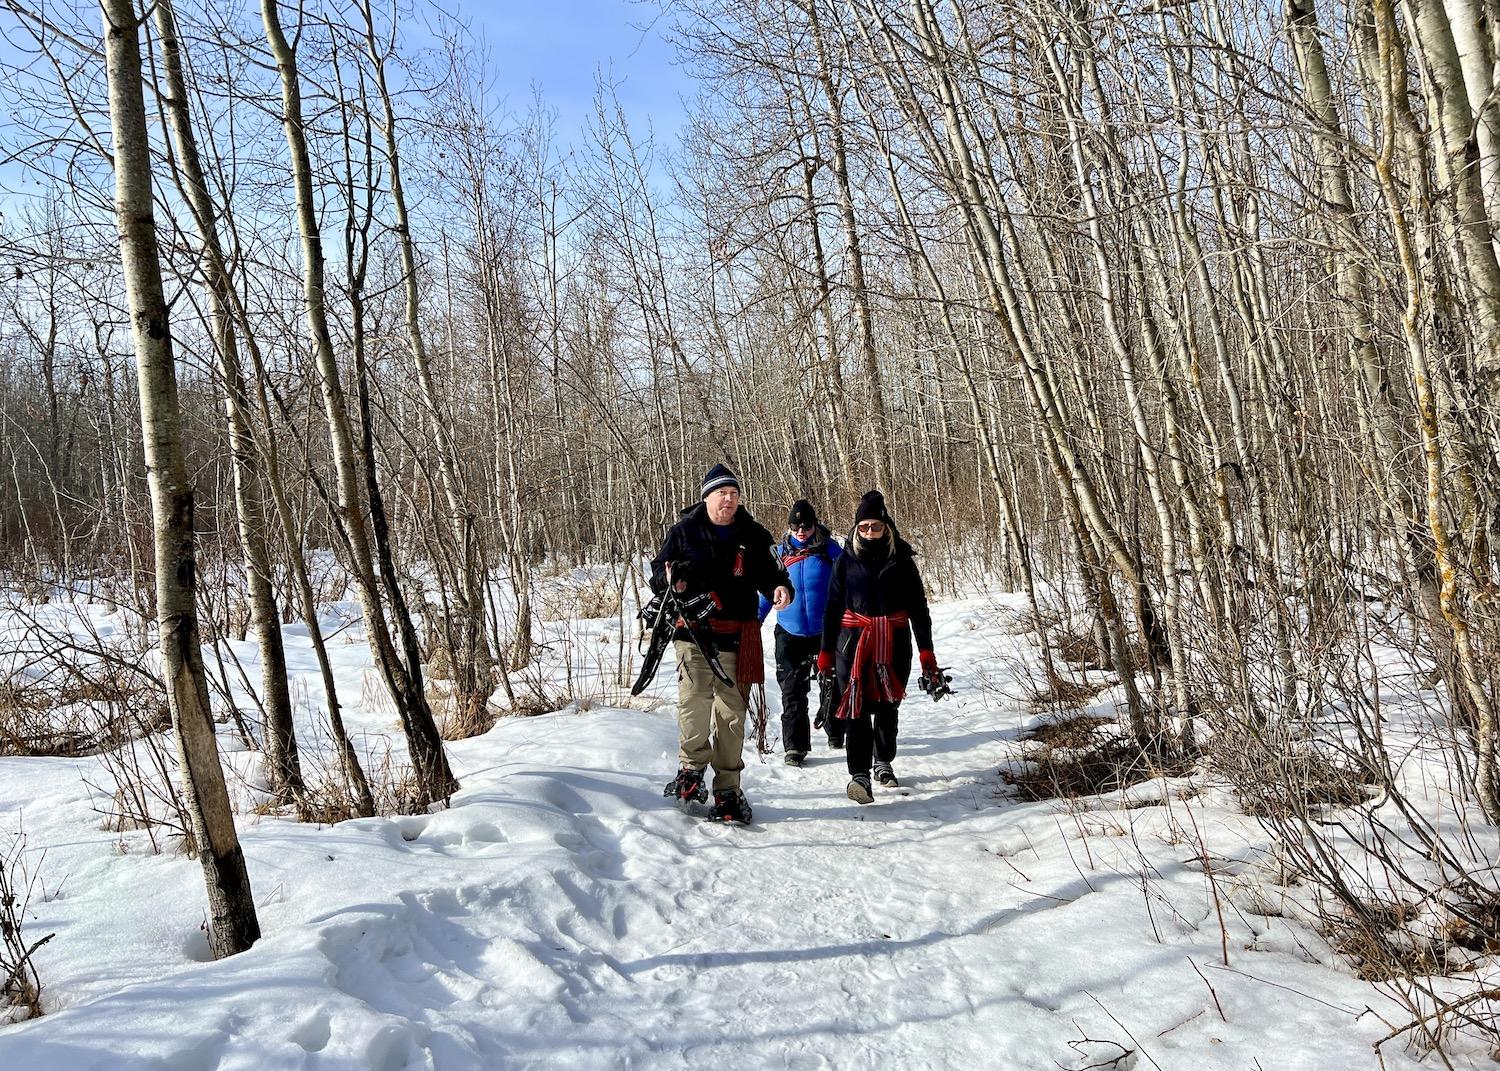 Talking Rock Tours founder Keith Diakiw leads a small group through Elk Island National Park.